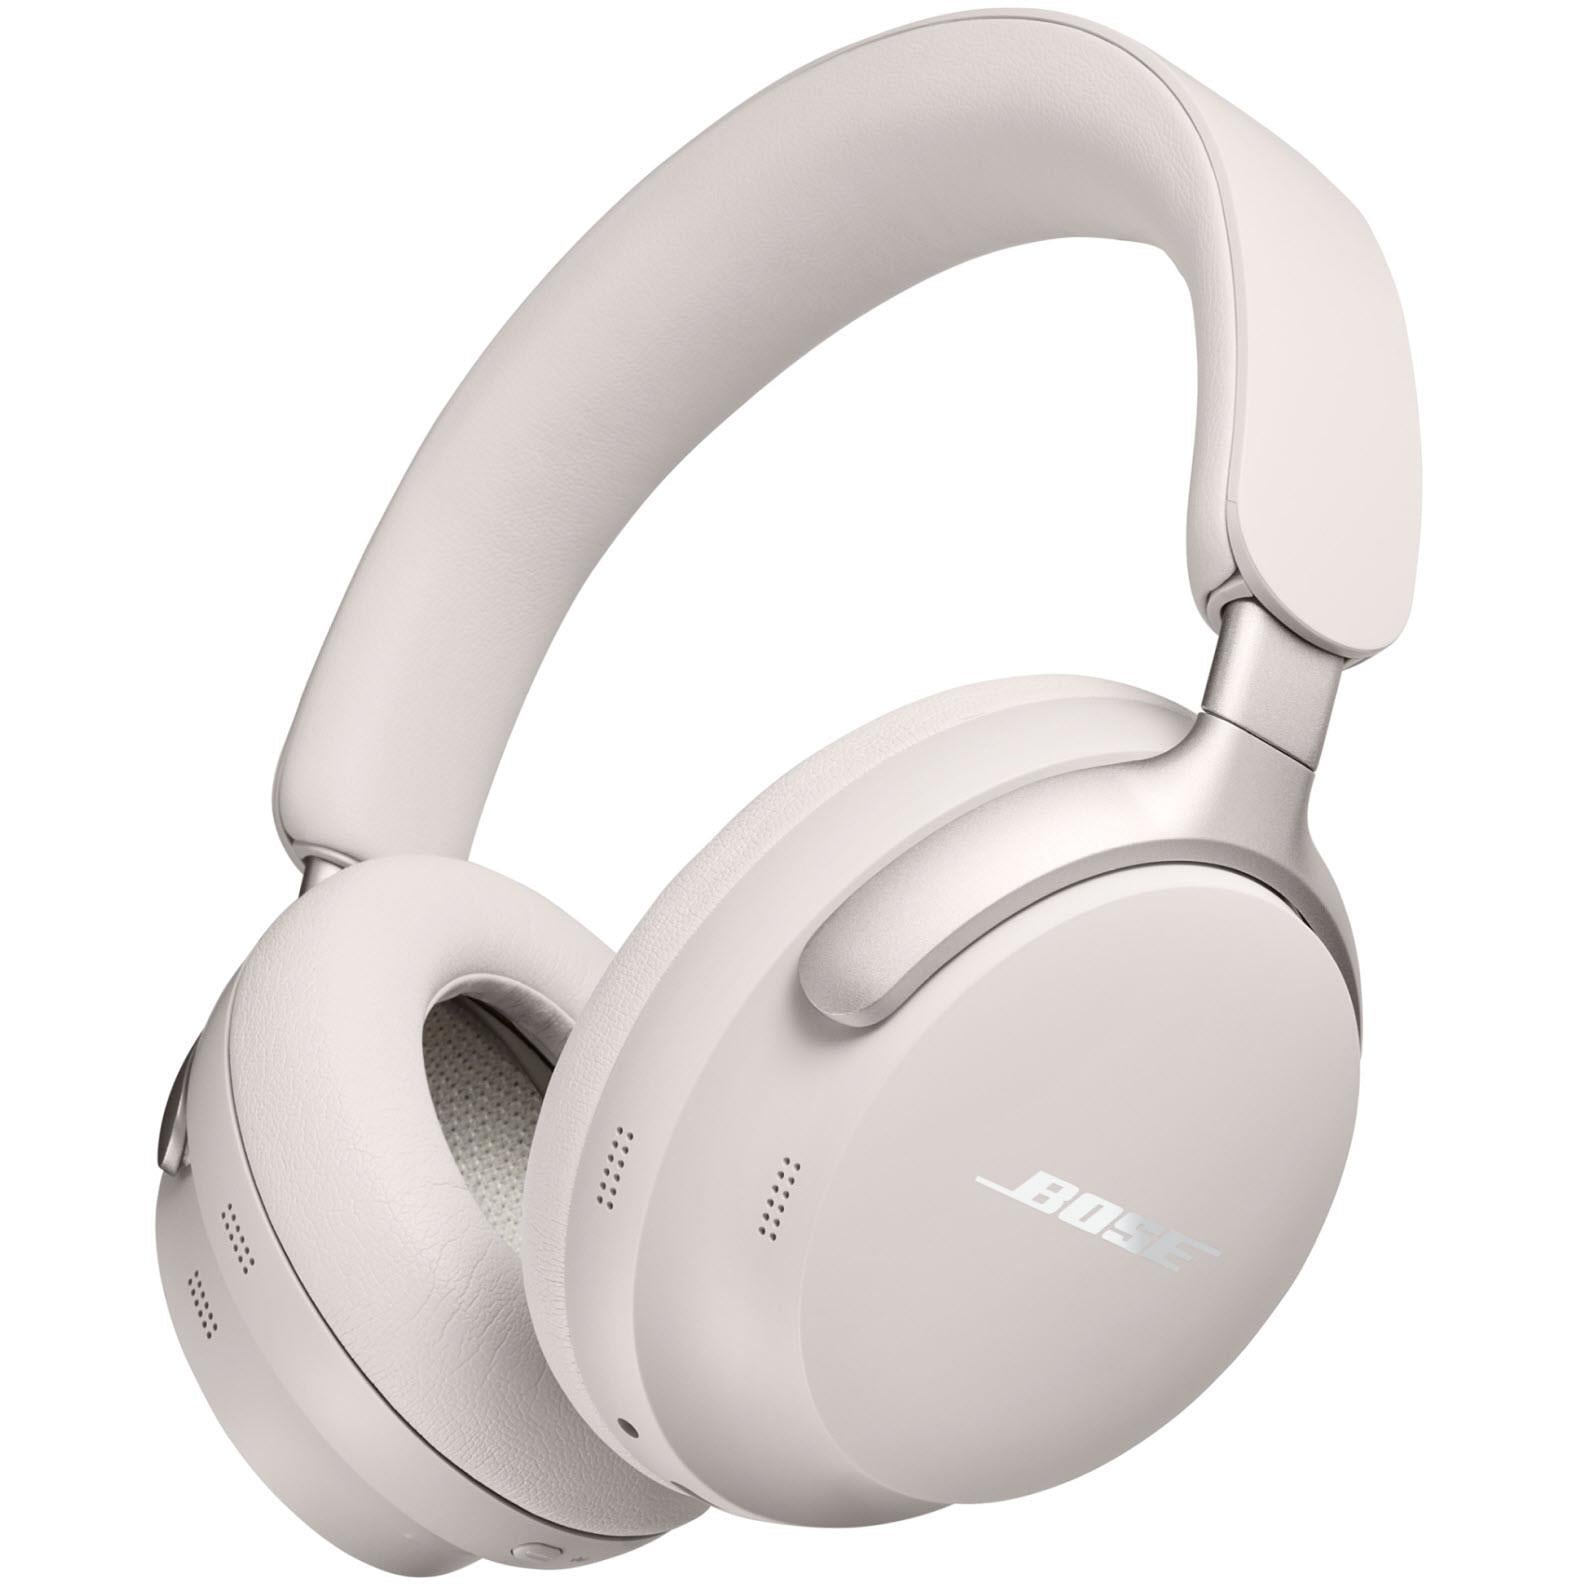 Bose QuietComfort 45 II – Leading the noise cancellation race